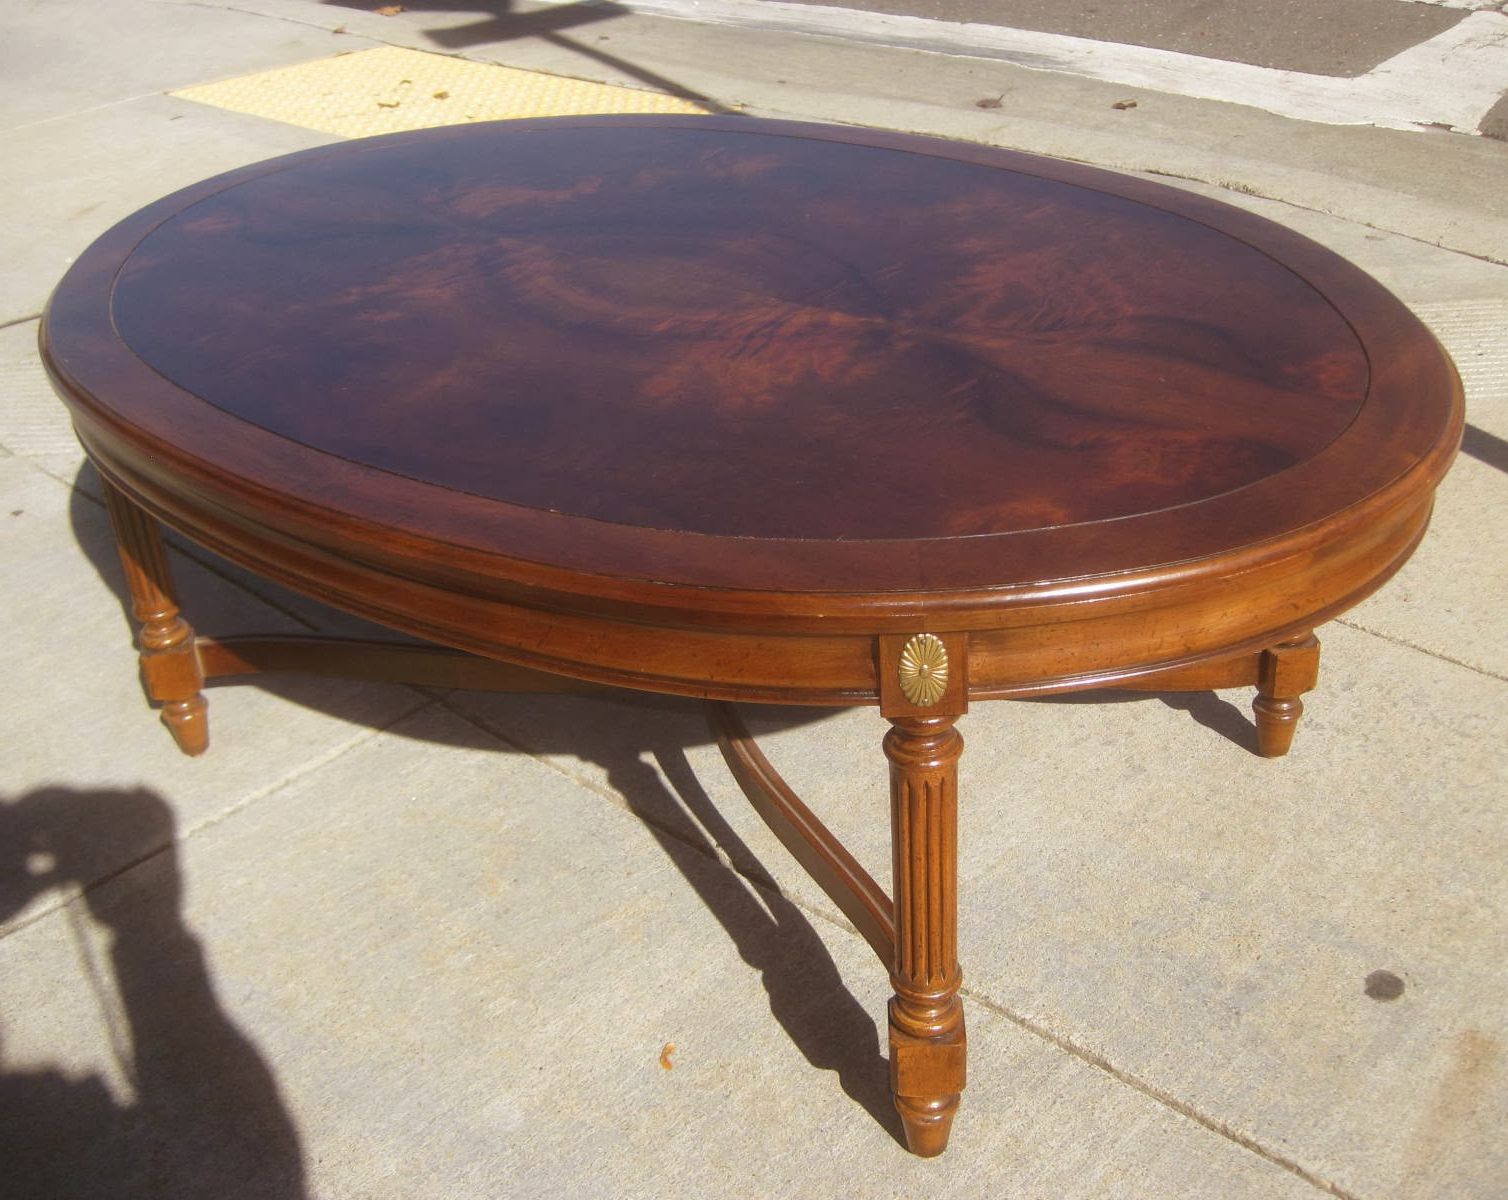 Uhuru Furniture & Collectibles: Sold – Burl Walnut Coffee Throughout Most Recently Released Hand Finished Walnut Coffee Tables (View 9 of 20)